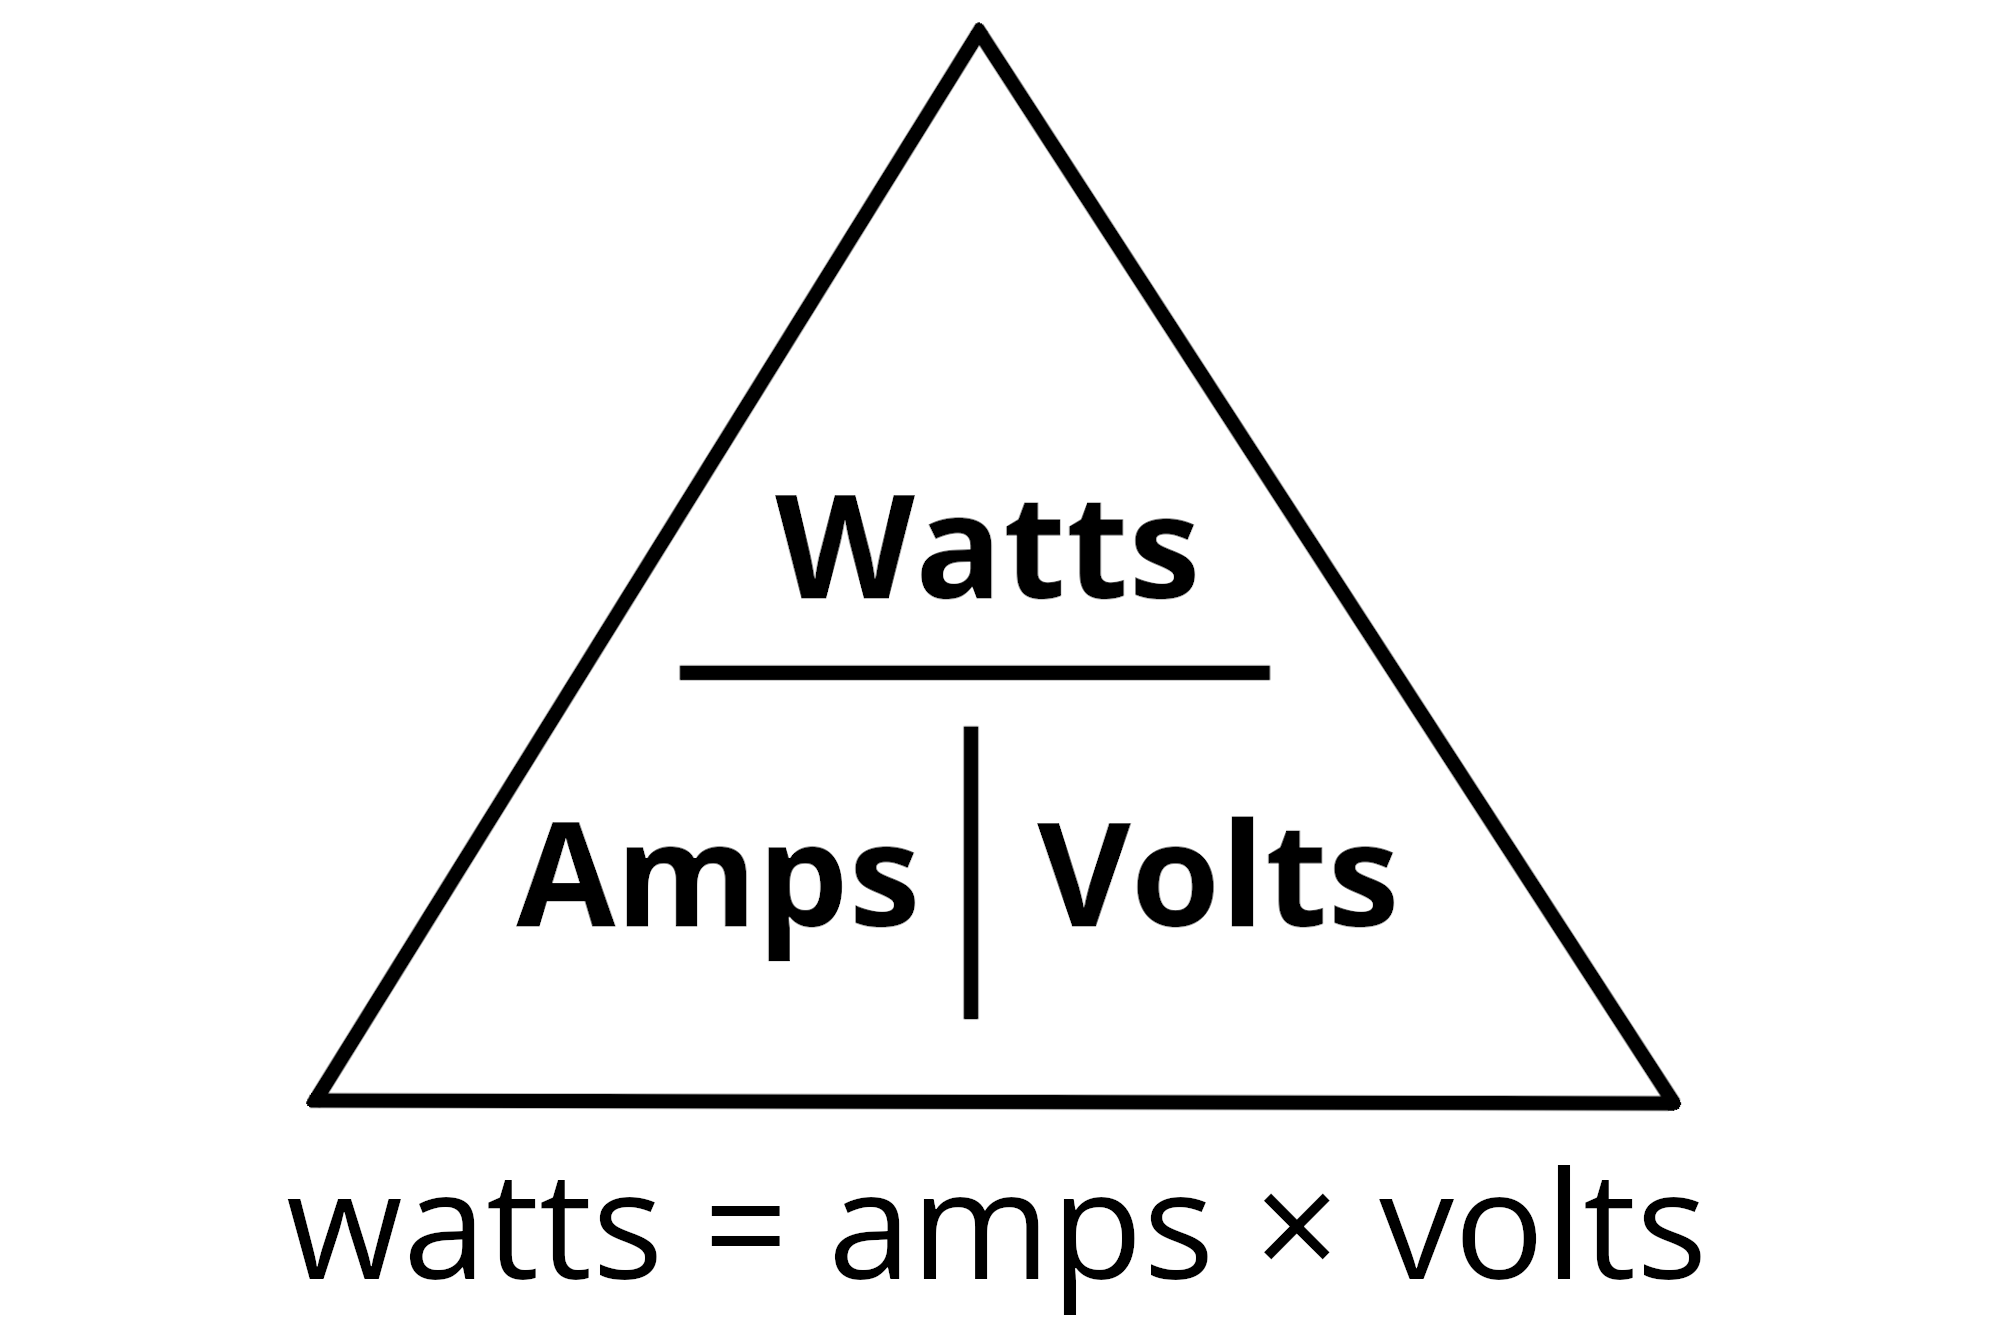 Power triangle illustrating the formula to convert amps to watts with watts being equal to amps times volts